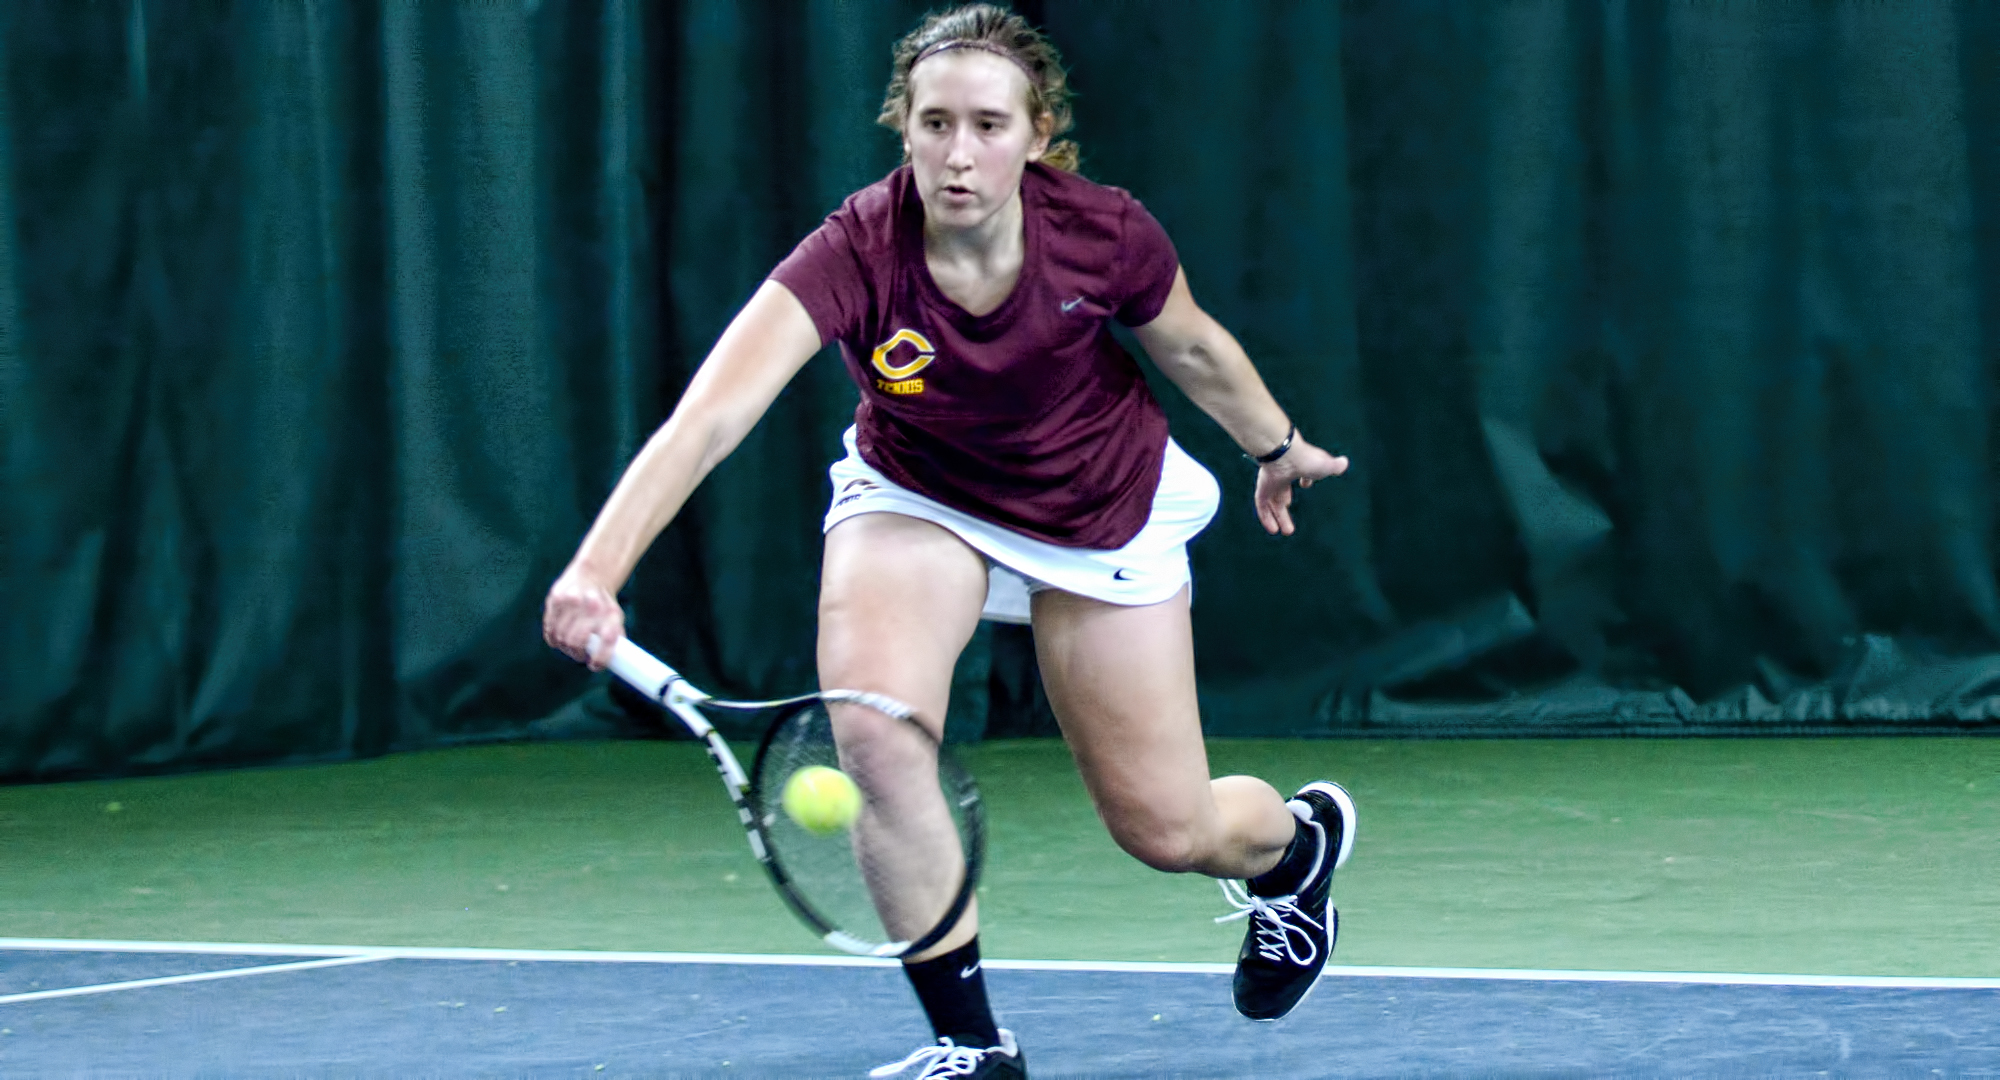 Concordia sophomore Lisa Neumann was part of the Cobber No.2 doubles team which lost a heartbreaker in the tie-breaker in their match at St. Mary's.